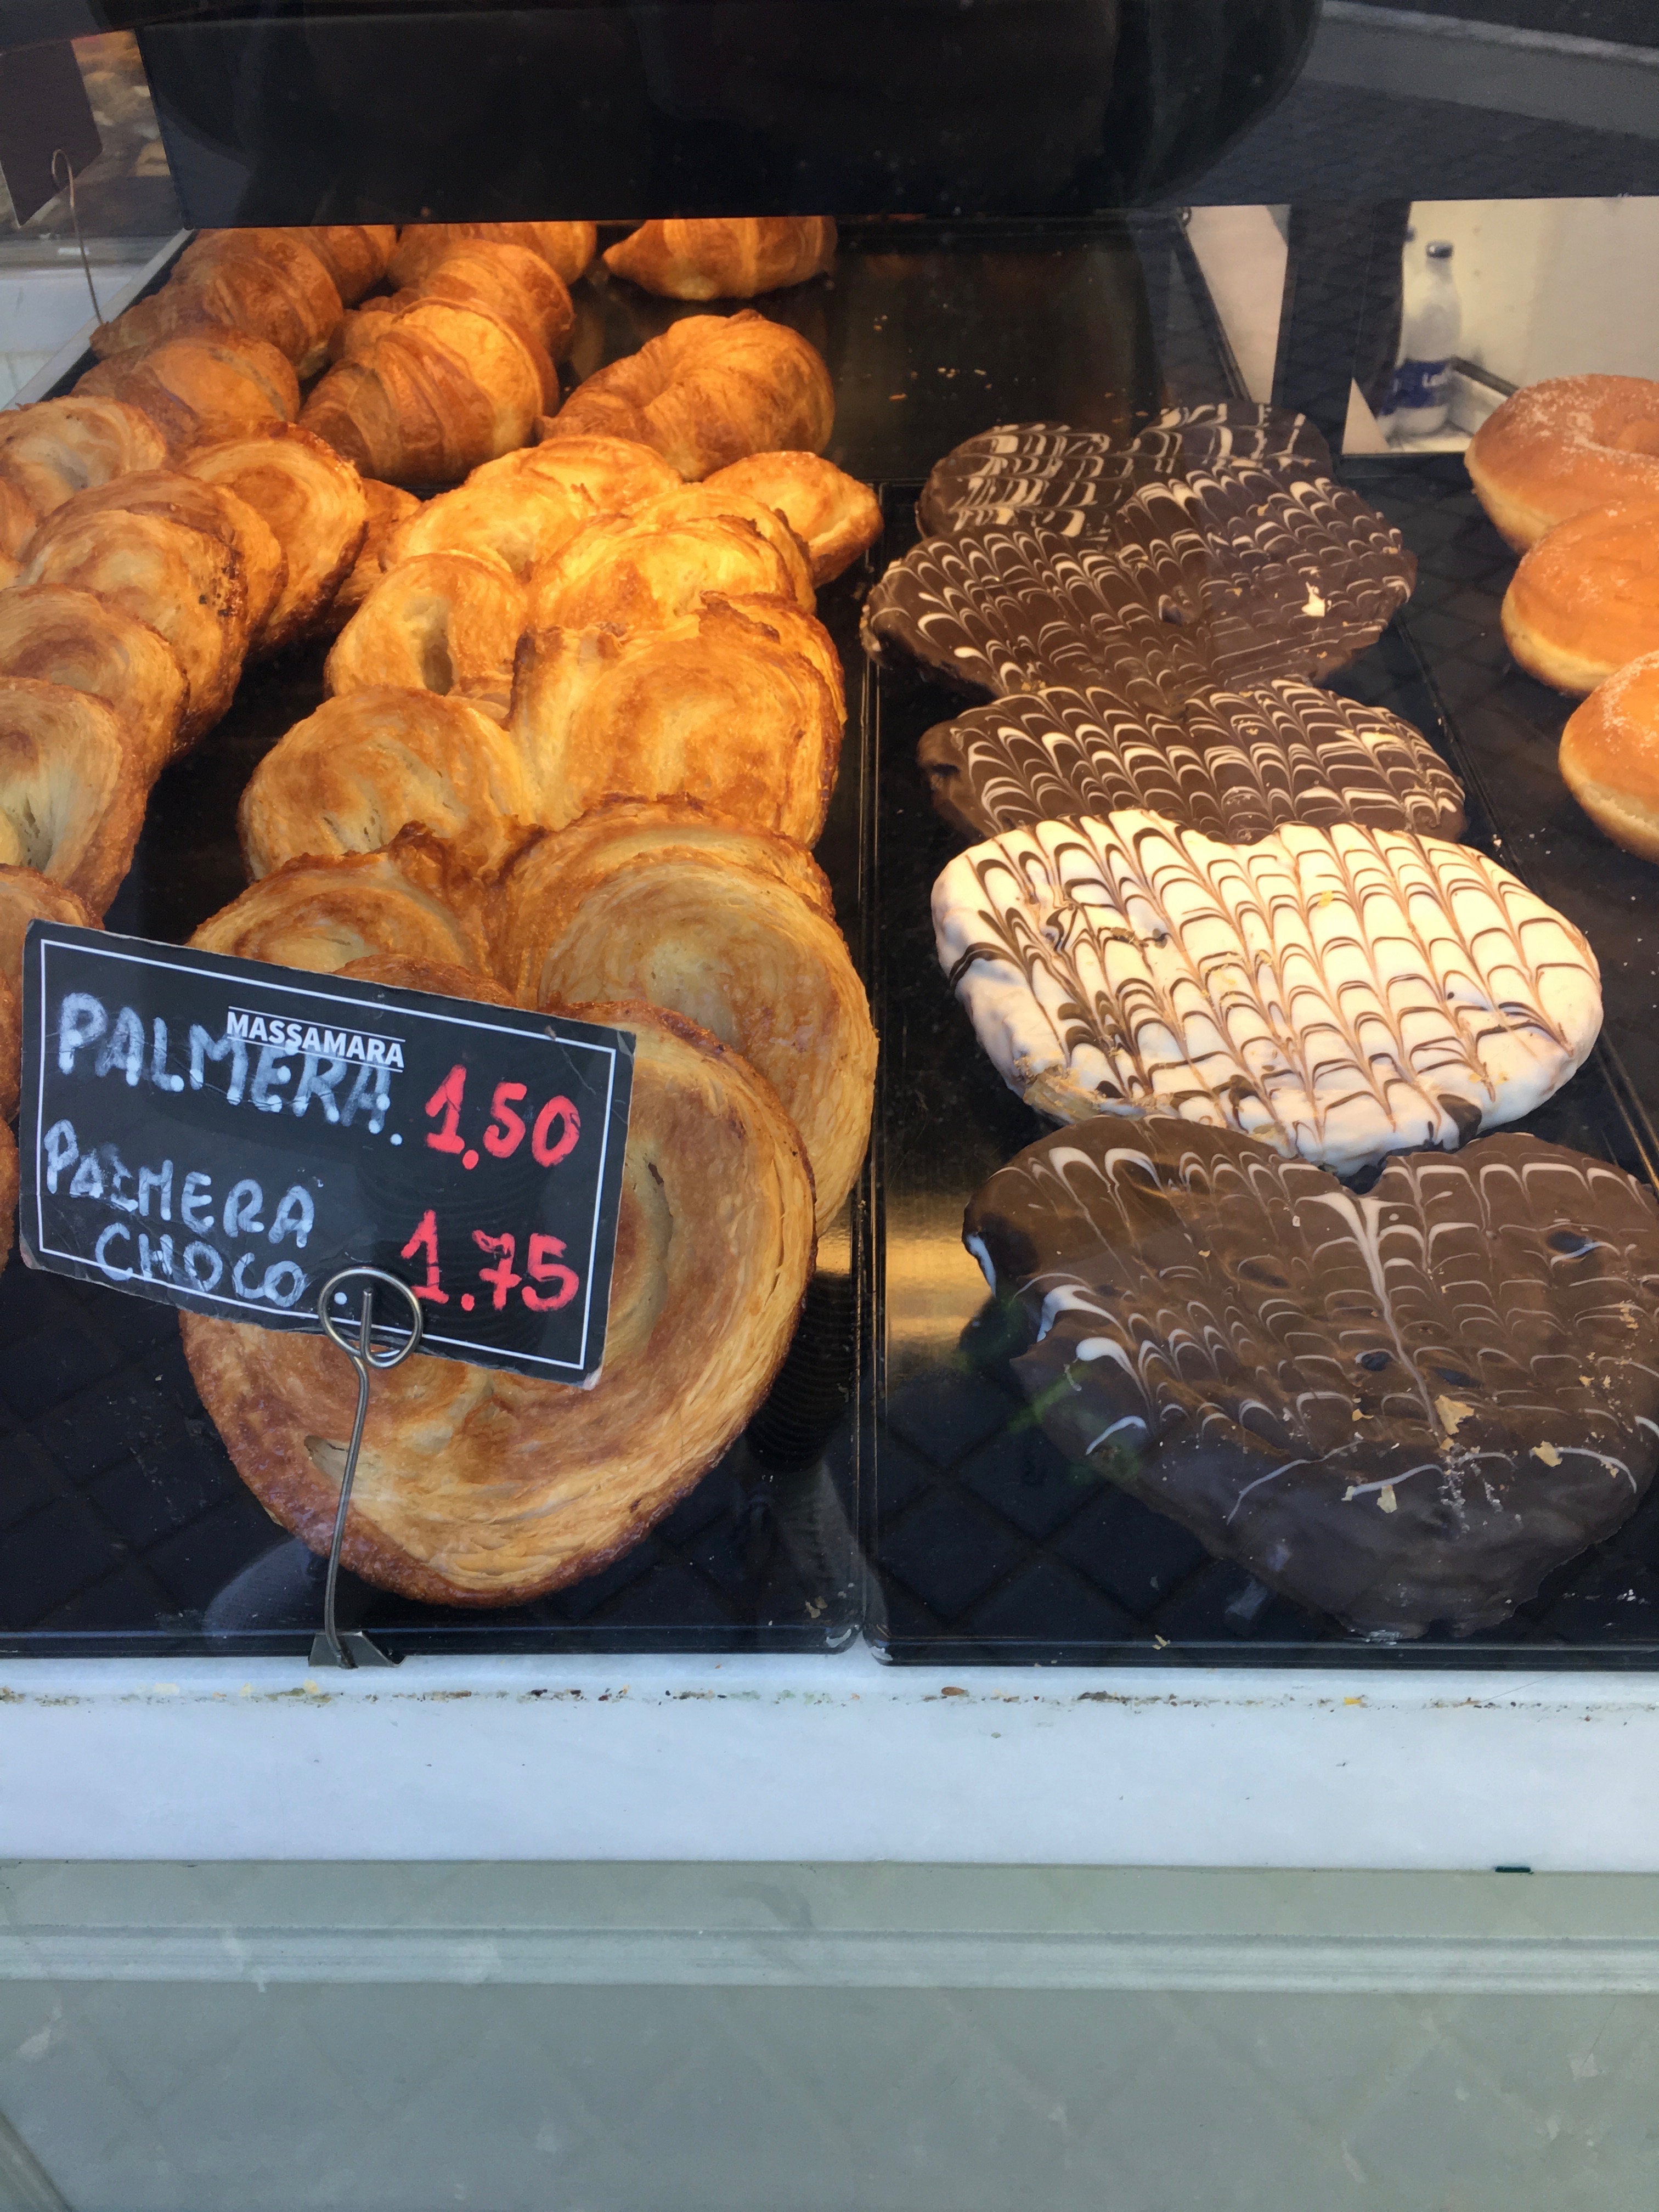 Palmeras cookies are the best treats in Spain.